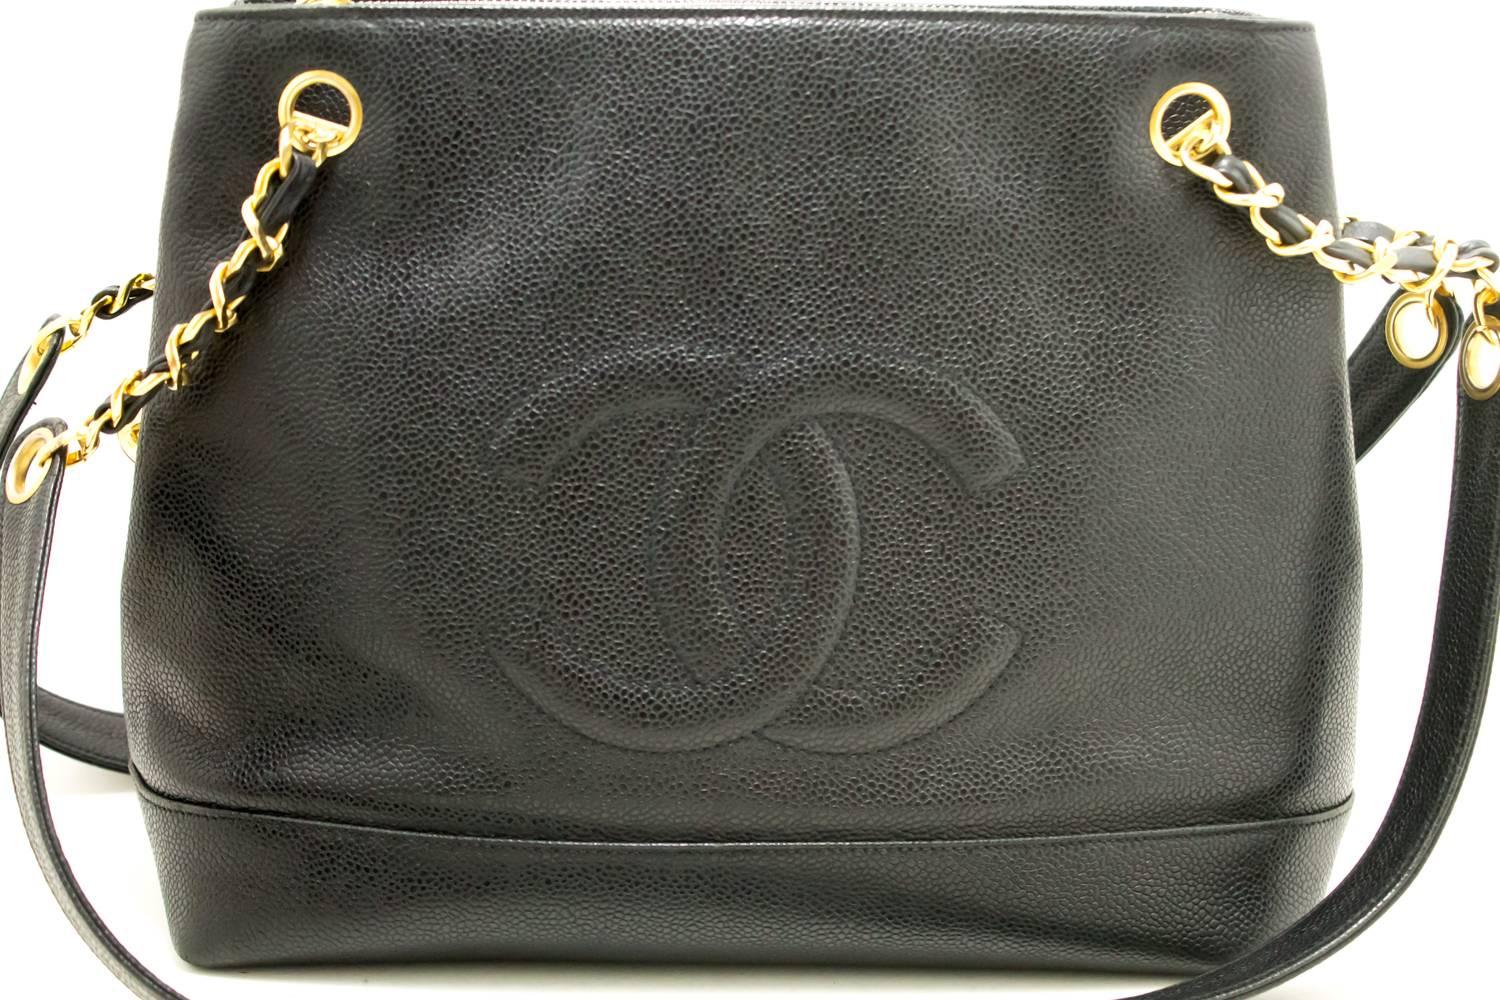 An authentic CHANEL Caviar Large Chain Shoulder Bag Black Leather Gold Zipper The outside material is Caviar leather.
Conditions & Ratings
Outside material: Caviar leather
Color: Black
Closure: Zipper
Hardware and chain: Gold-tone
Made in